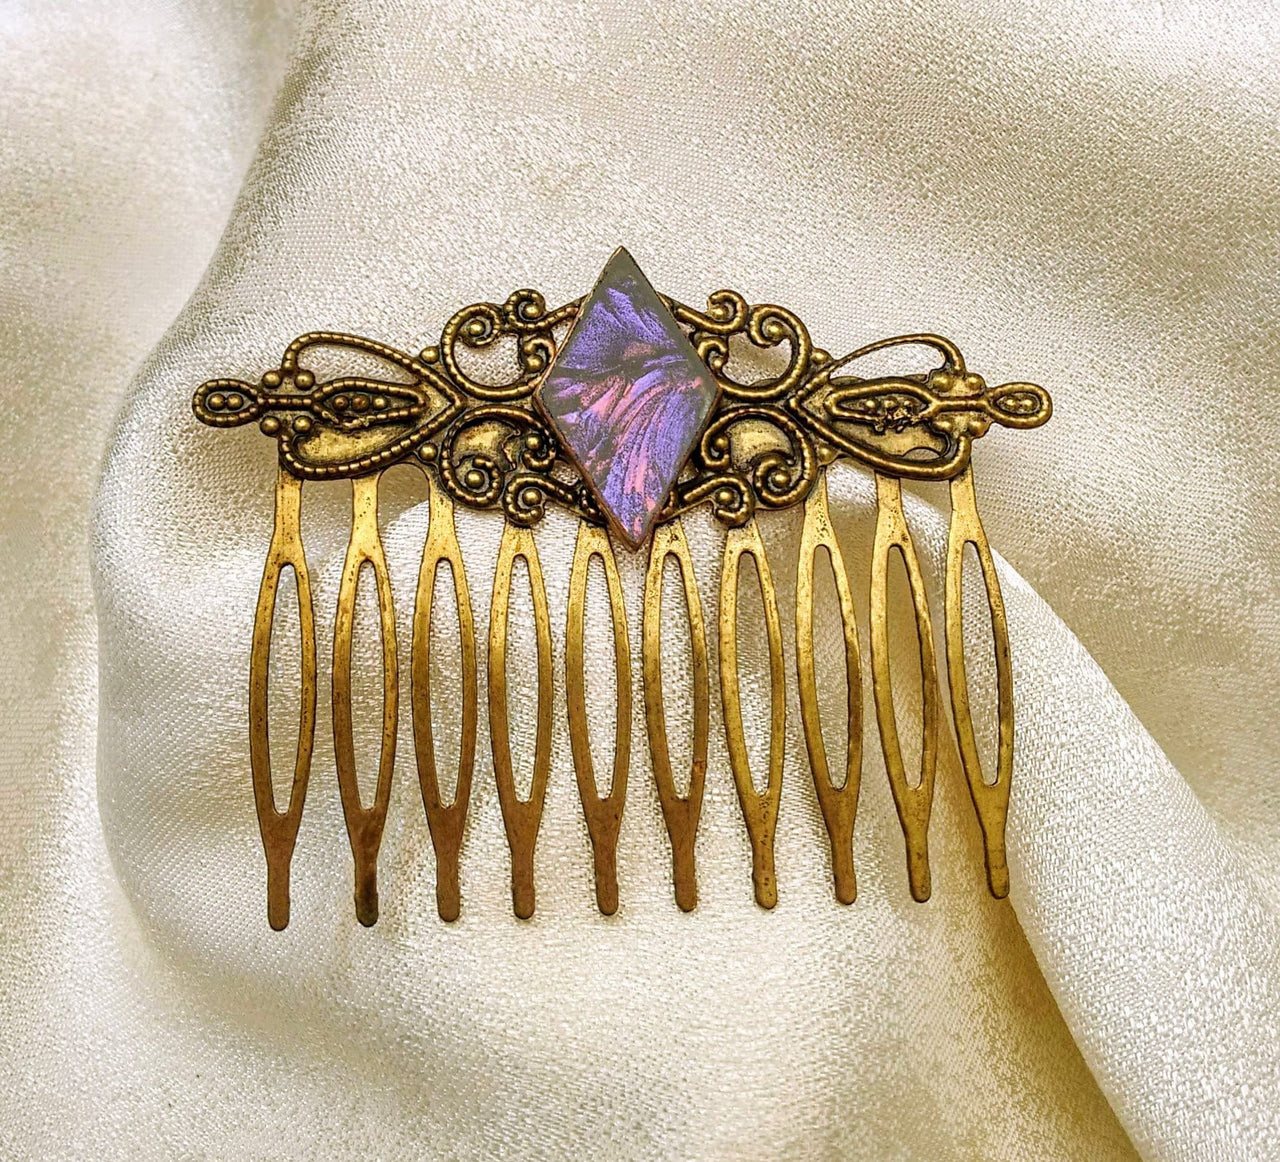 Sophisticated antiqued gold finished hair combs with Van Gogh stained glass, vintage style hair combs. Perfect for weddings, proms, Medieval Fairs, Renaissance Festivals, or as thoughtful gifts for bridesmaids, Valentine's Day, birthdays, and anniversaries, these combs are as versatile as they are stunning. Handmade by Brockus Creations 2.